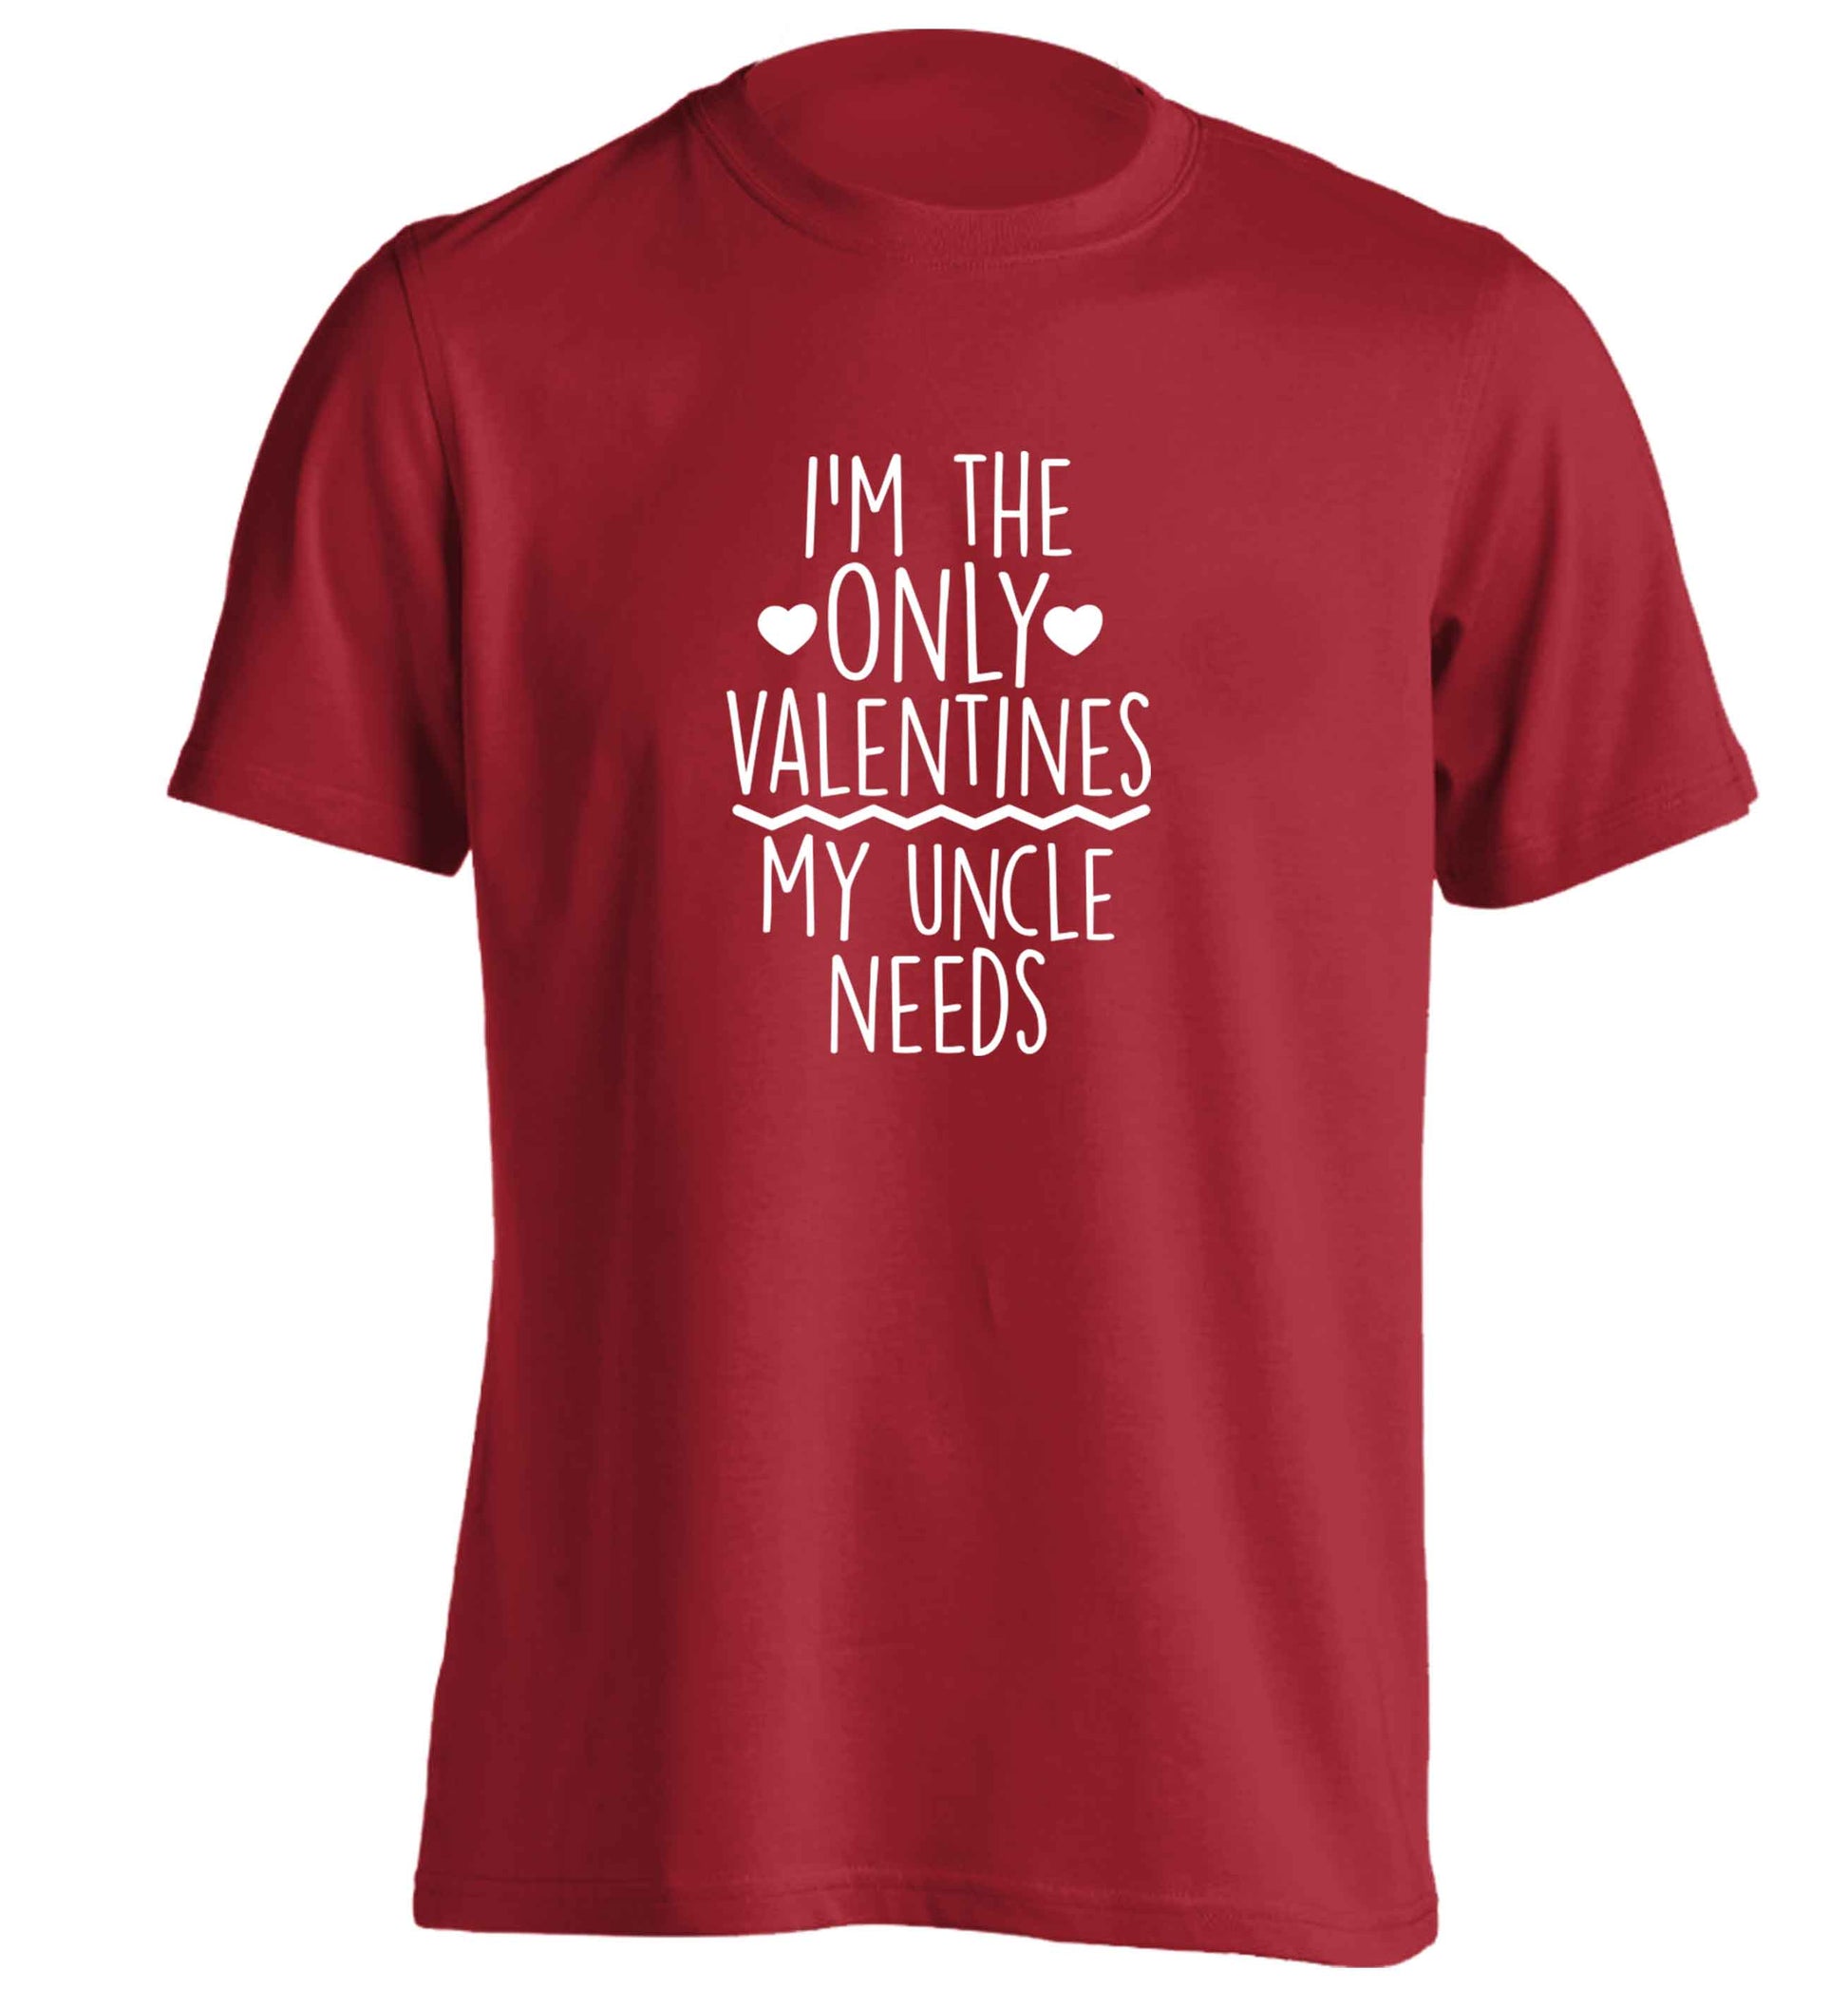 I'm the only valentines my uncle needs adults unisex red Tshirt 2XL